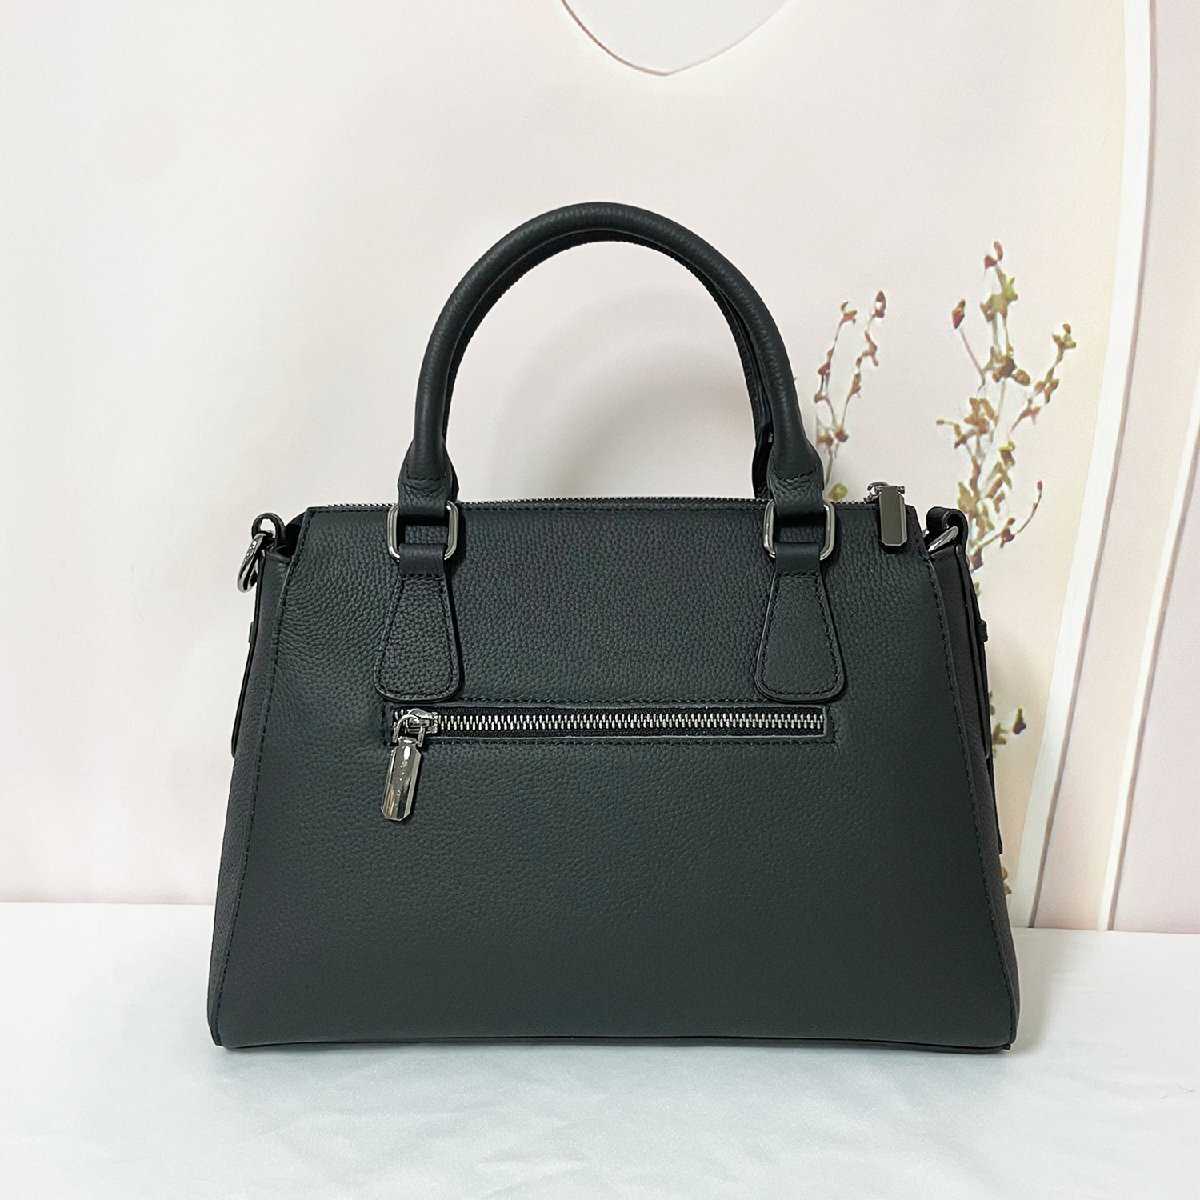  high class * shoulder bag regular price 12 ten thousand *Emmauela* Italy * milano departure * fine quality cow leather leather high capacity diagonal ... in stock 2WAY Classic office 